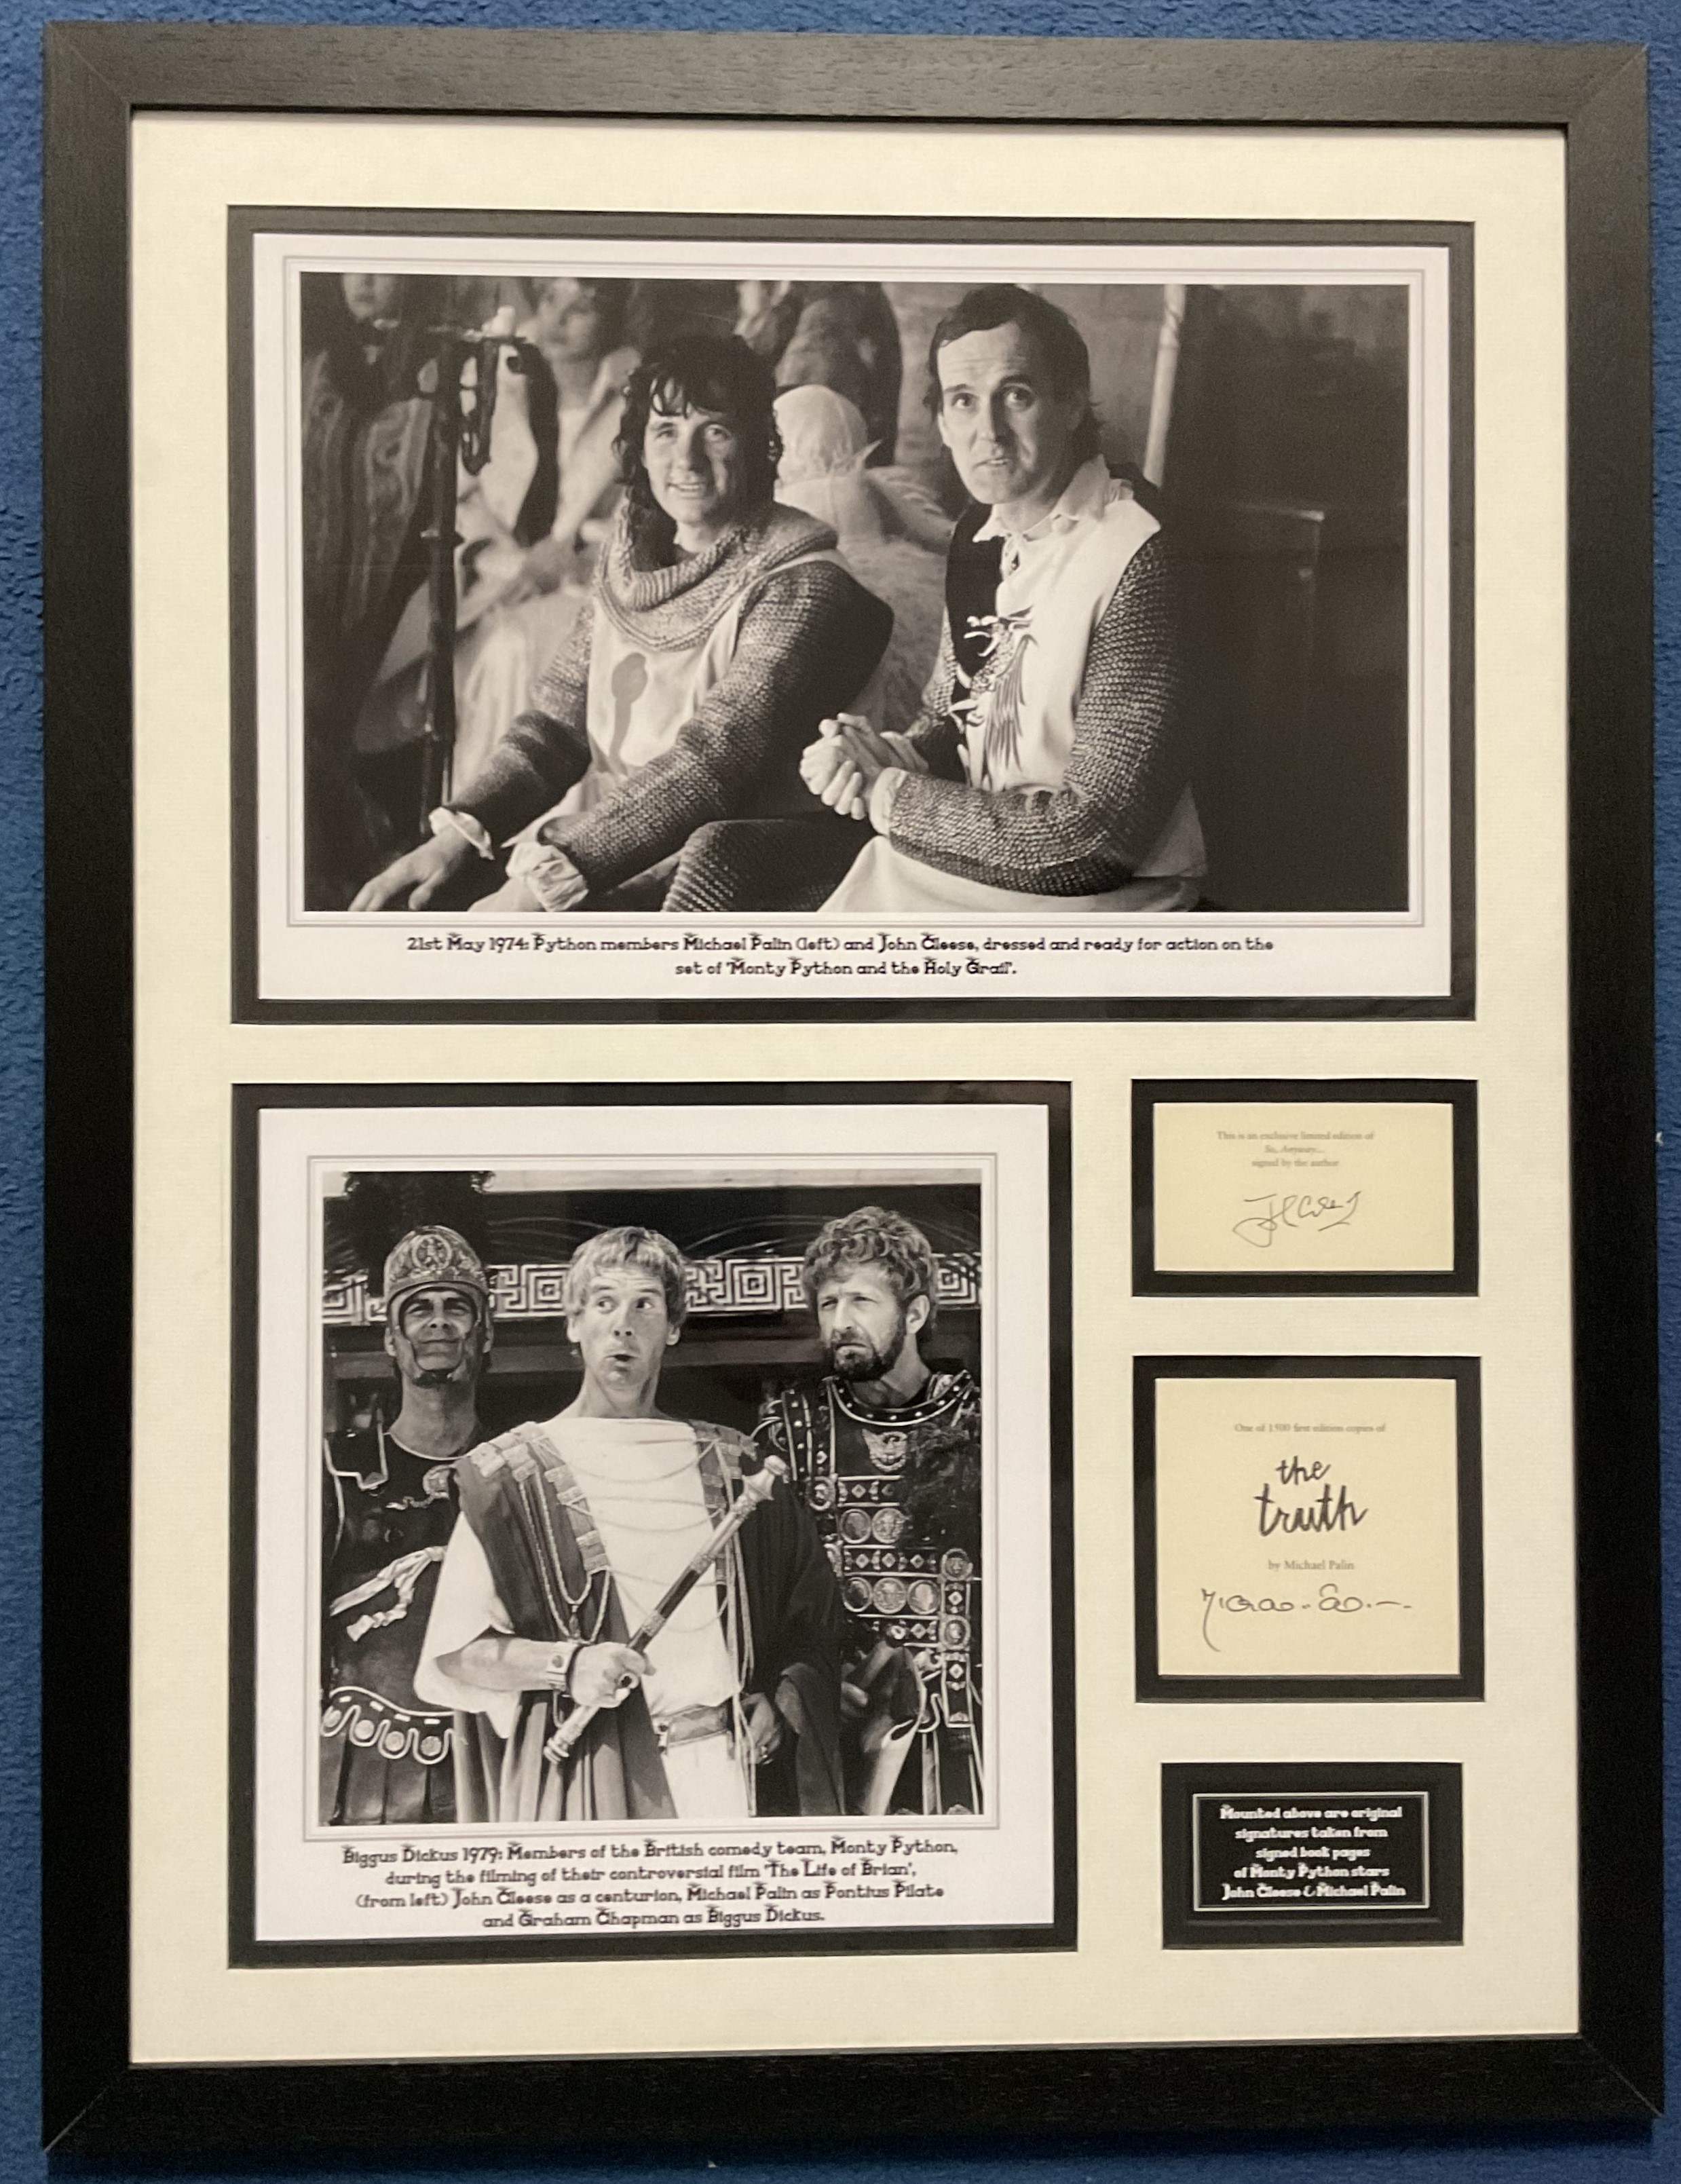 Monty Python Stars John Cleese and Michael Palin Signed Book Pages With 2 Black and White Photos,